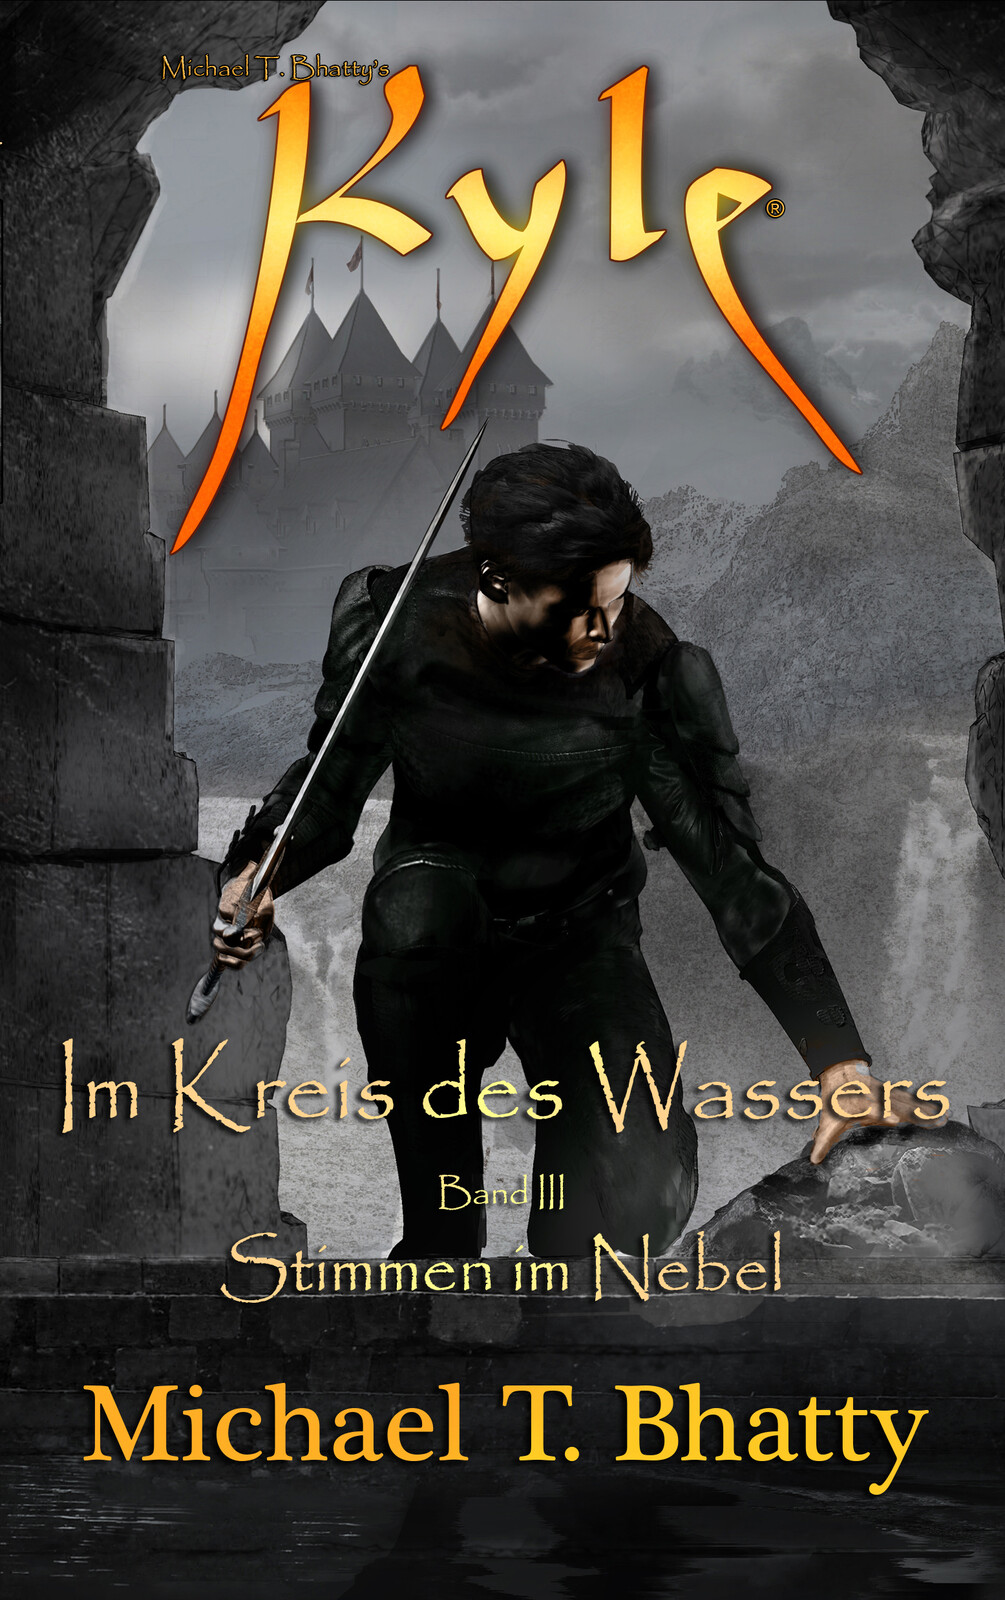 KYLE 2 | The final cover of book II (May, 2019). I made the castle a bit more grim.